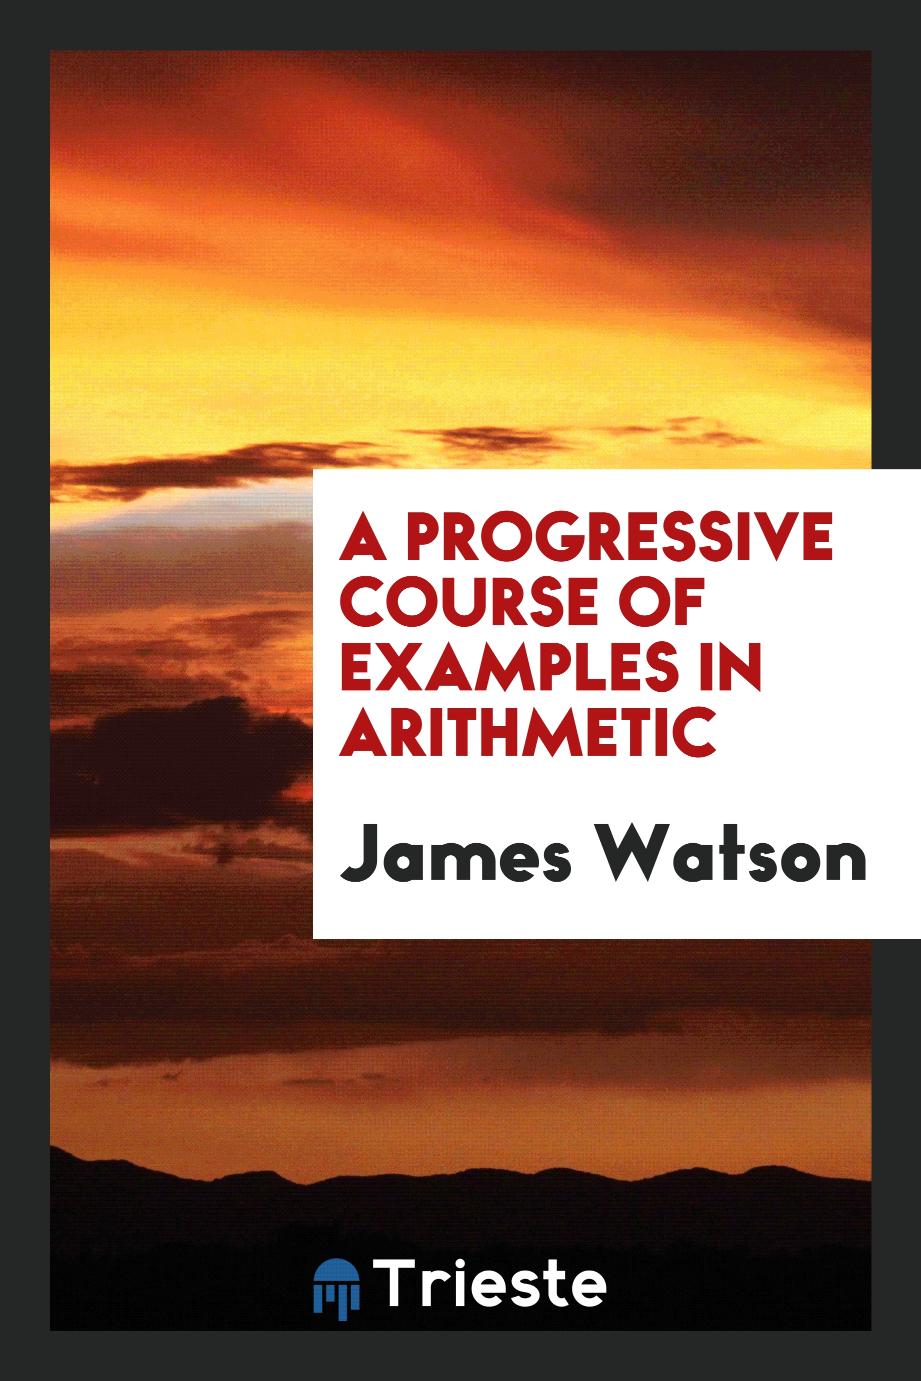 A Progressive Course of Examples in Arithmetic